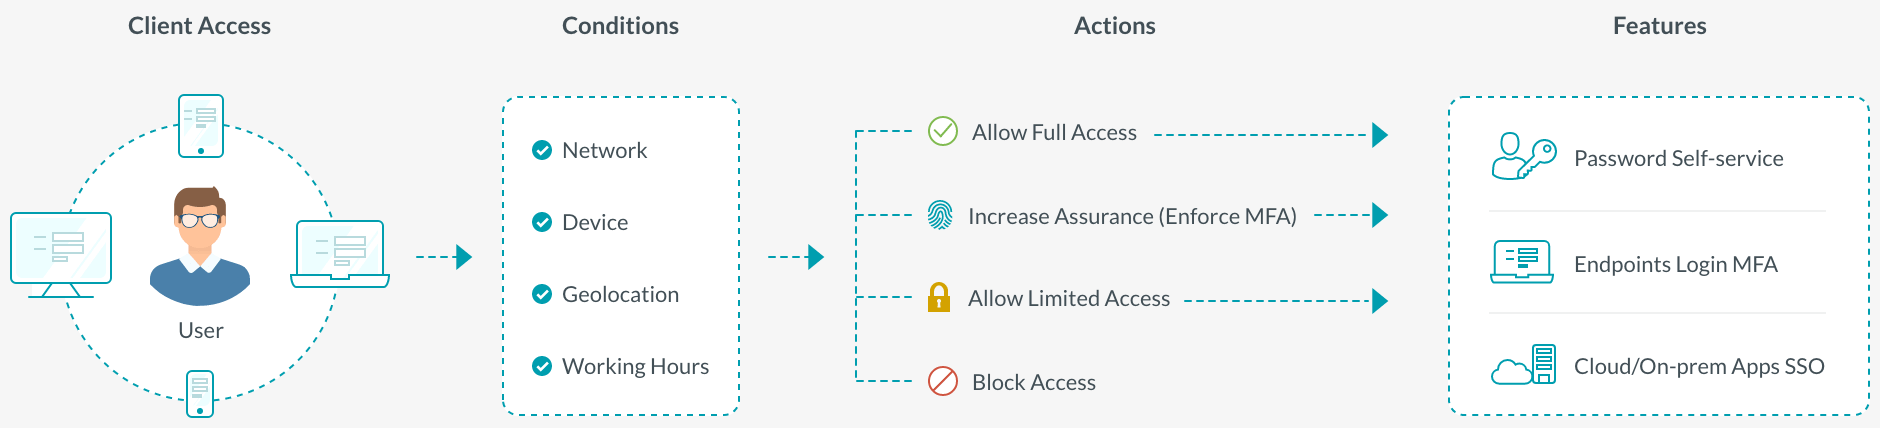 ADSelfService Plus: Conditional Access Policy